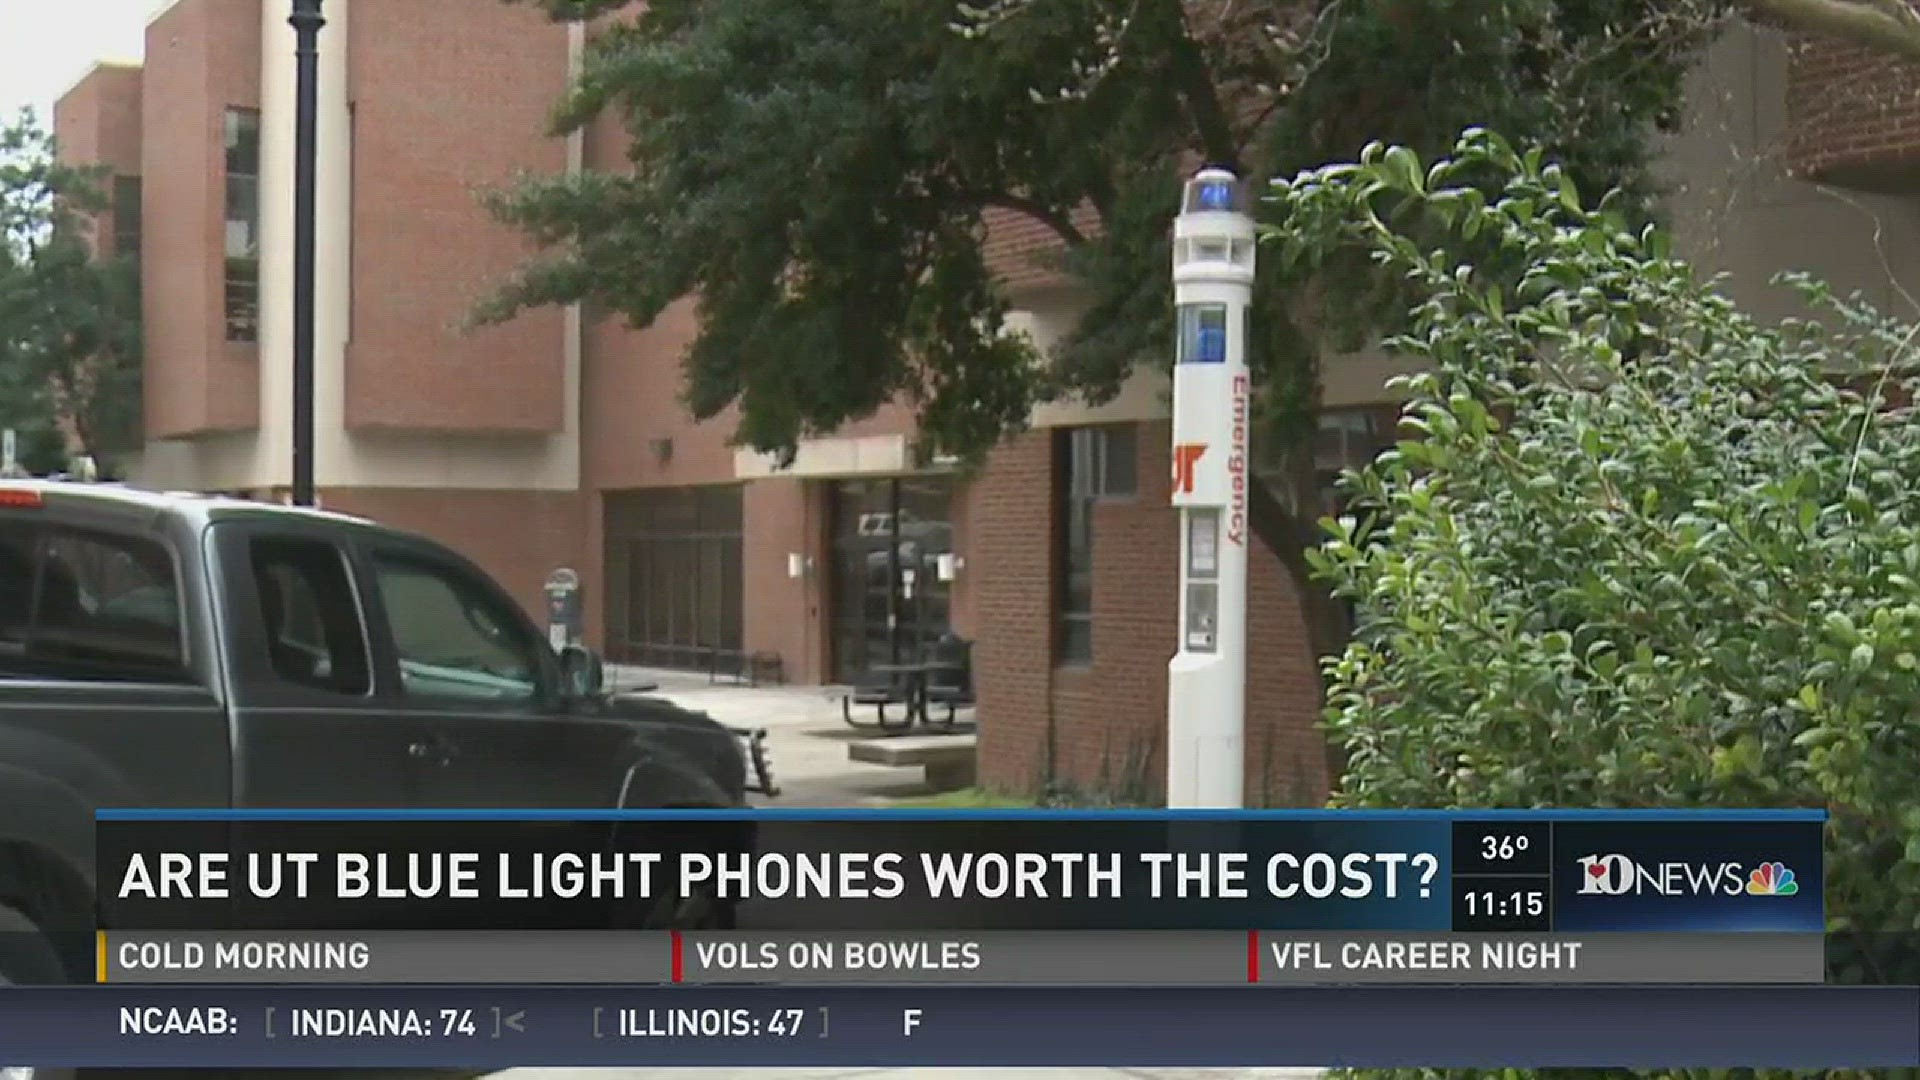 Some question the value and cost of the campus blue light phones at UT. Feb. 25, 2016